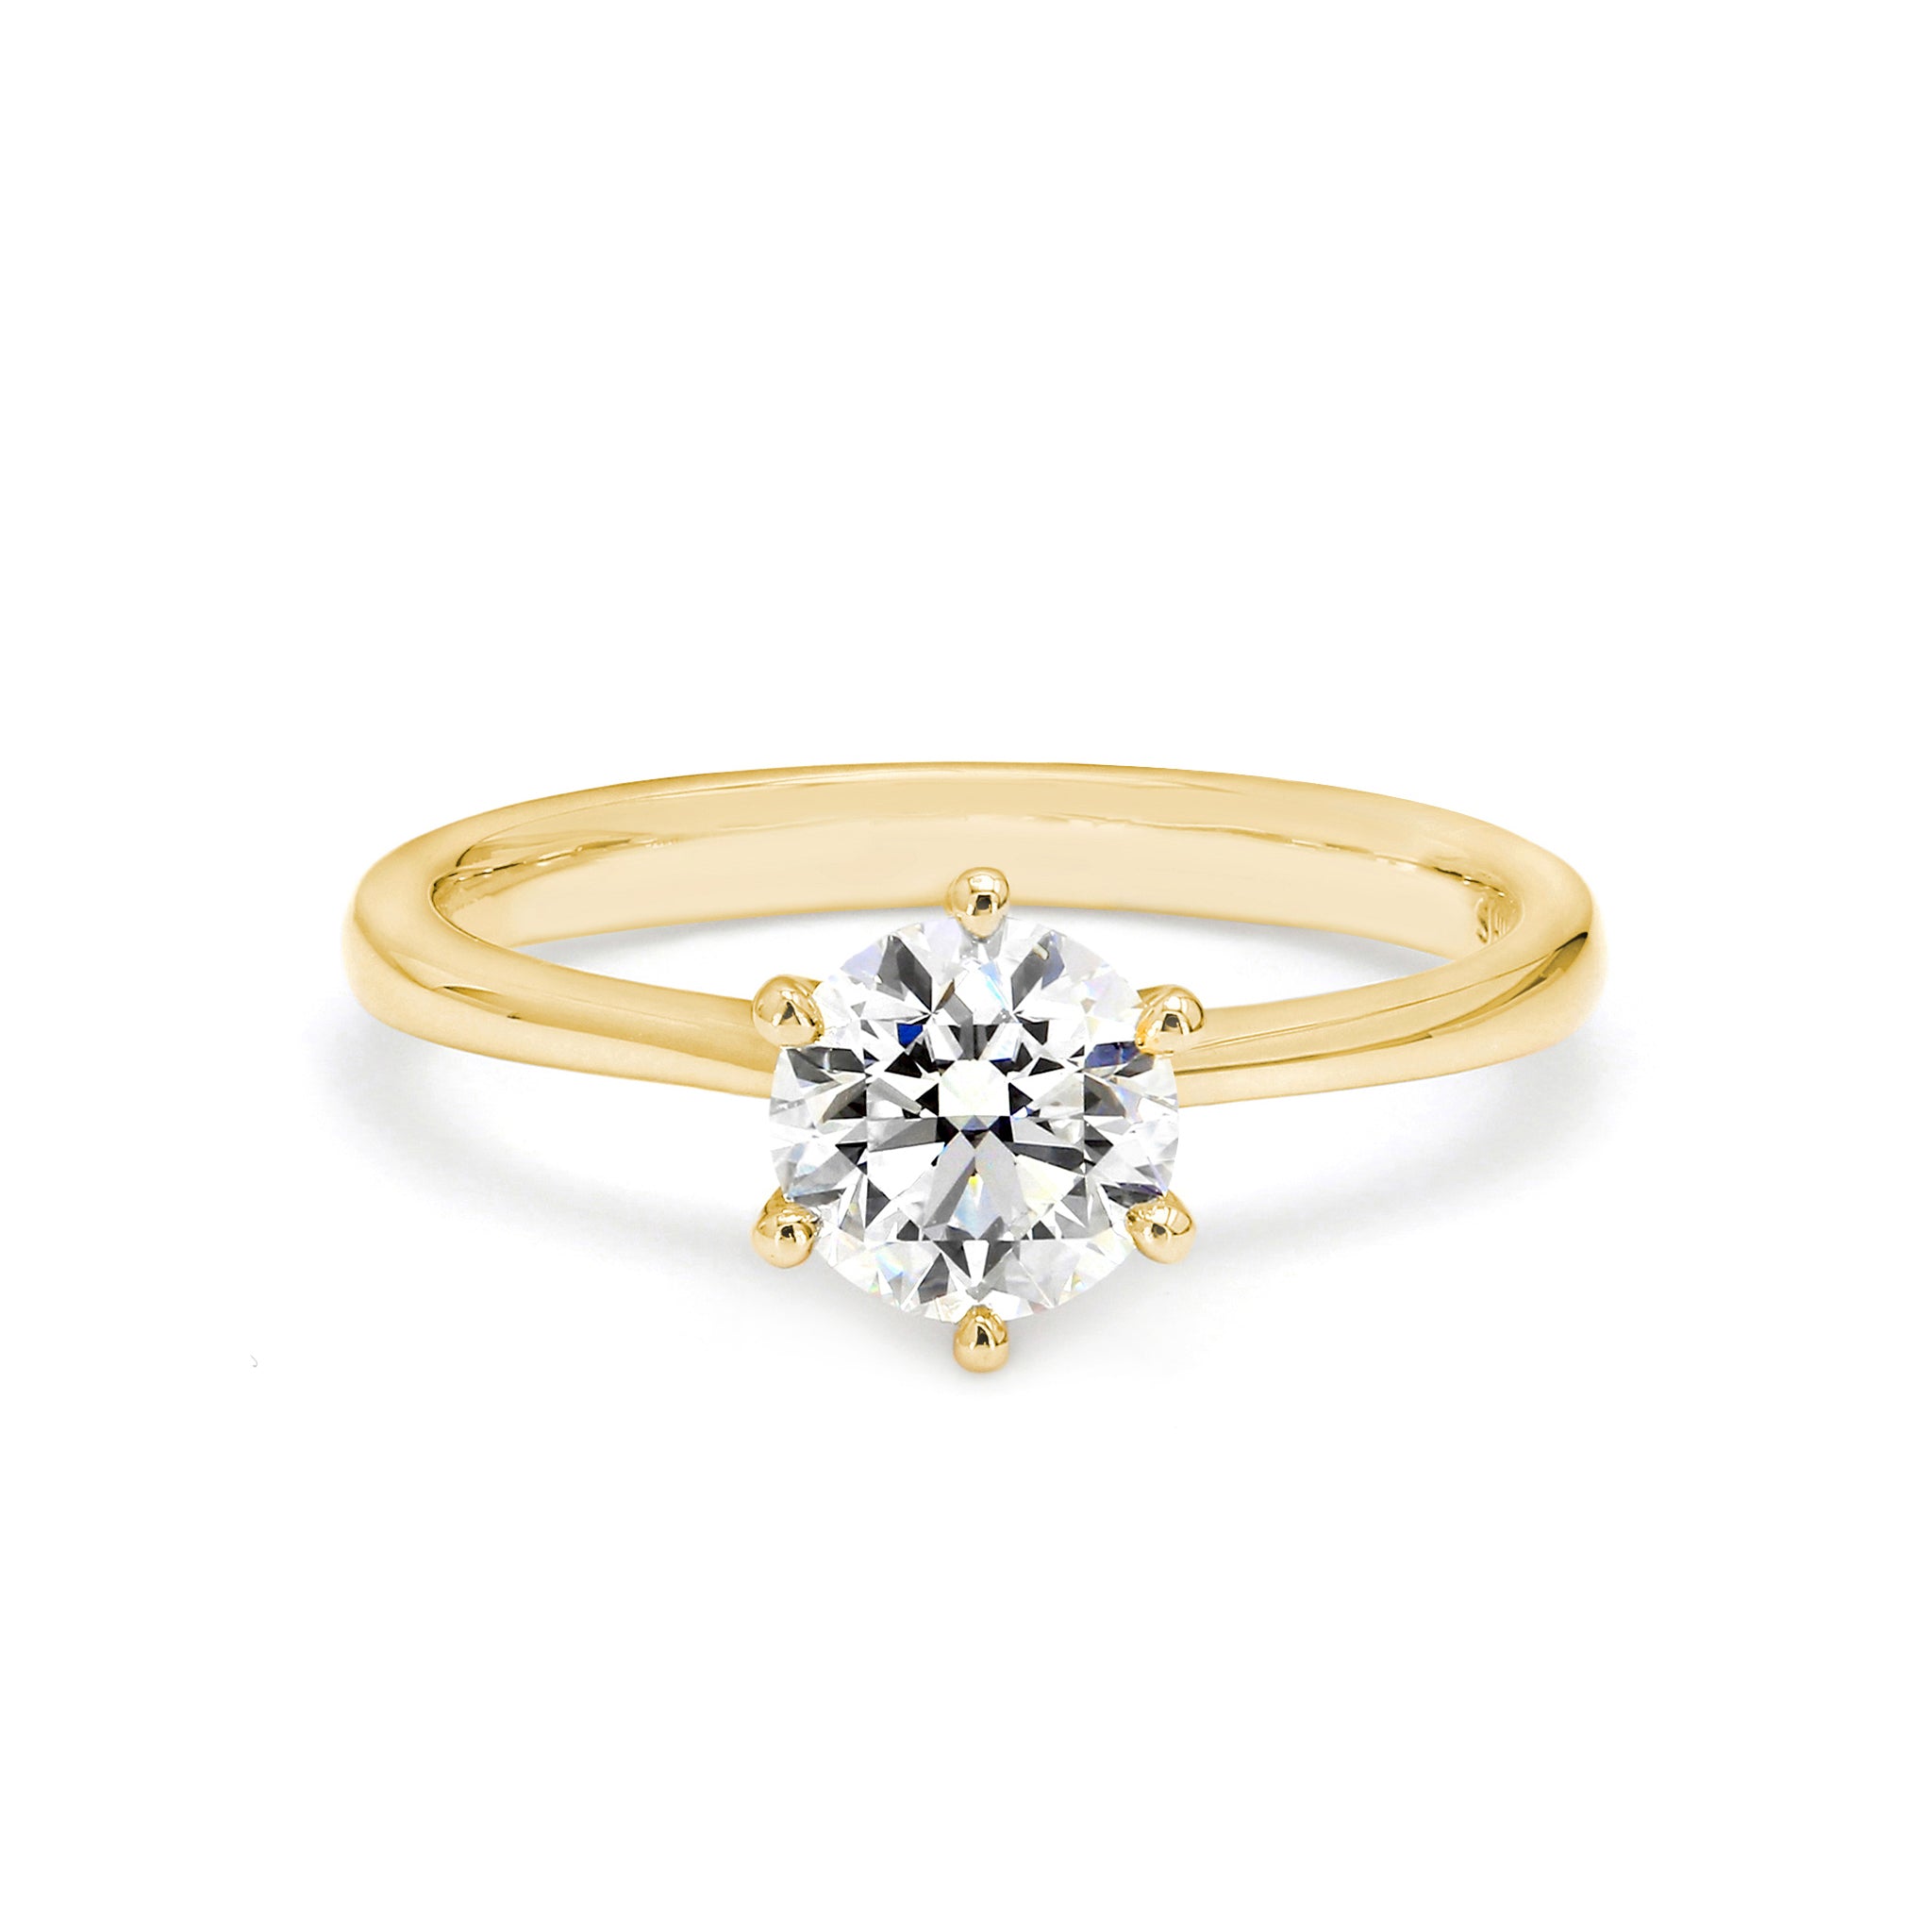 Shimansky - 6 Claw Classic Solitaire Diamond Ring 1.00ct crafted in 18K Yellow Gold